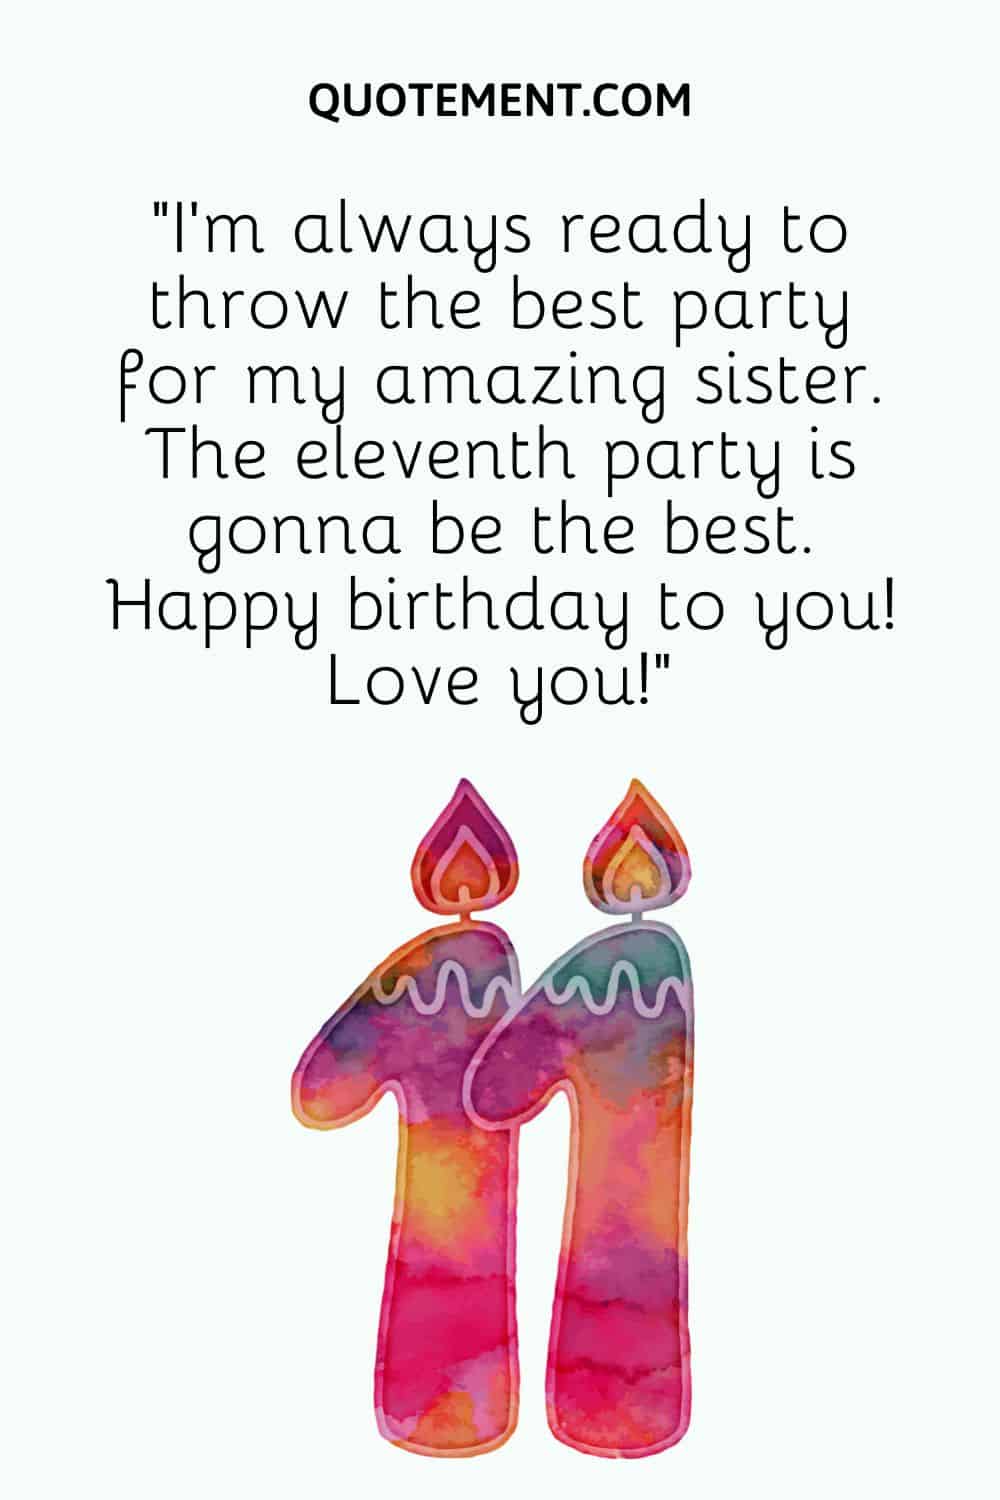 “I’m always ready to throw the best party for my amazing sister. The eleventh party is gonna be the best. Happy birthday to you! Love you!”